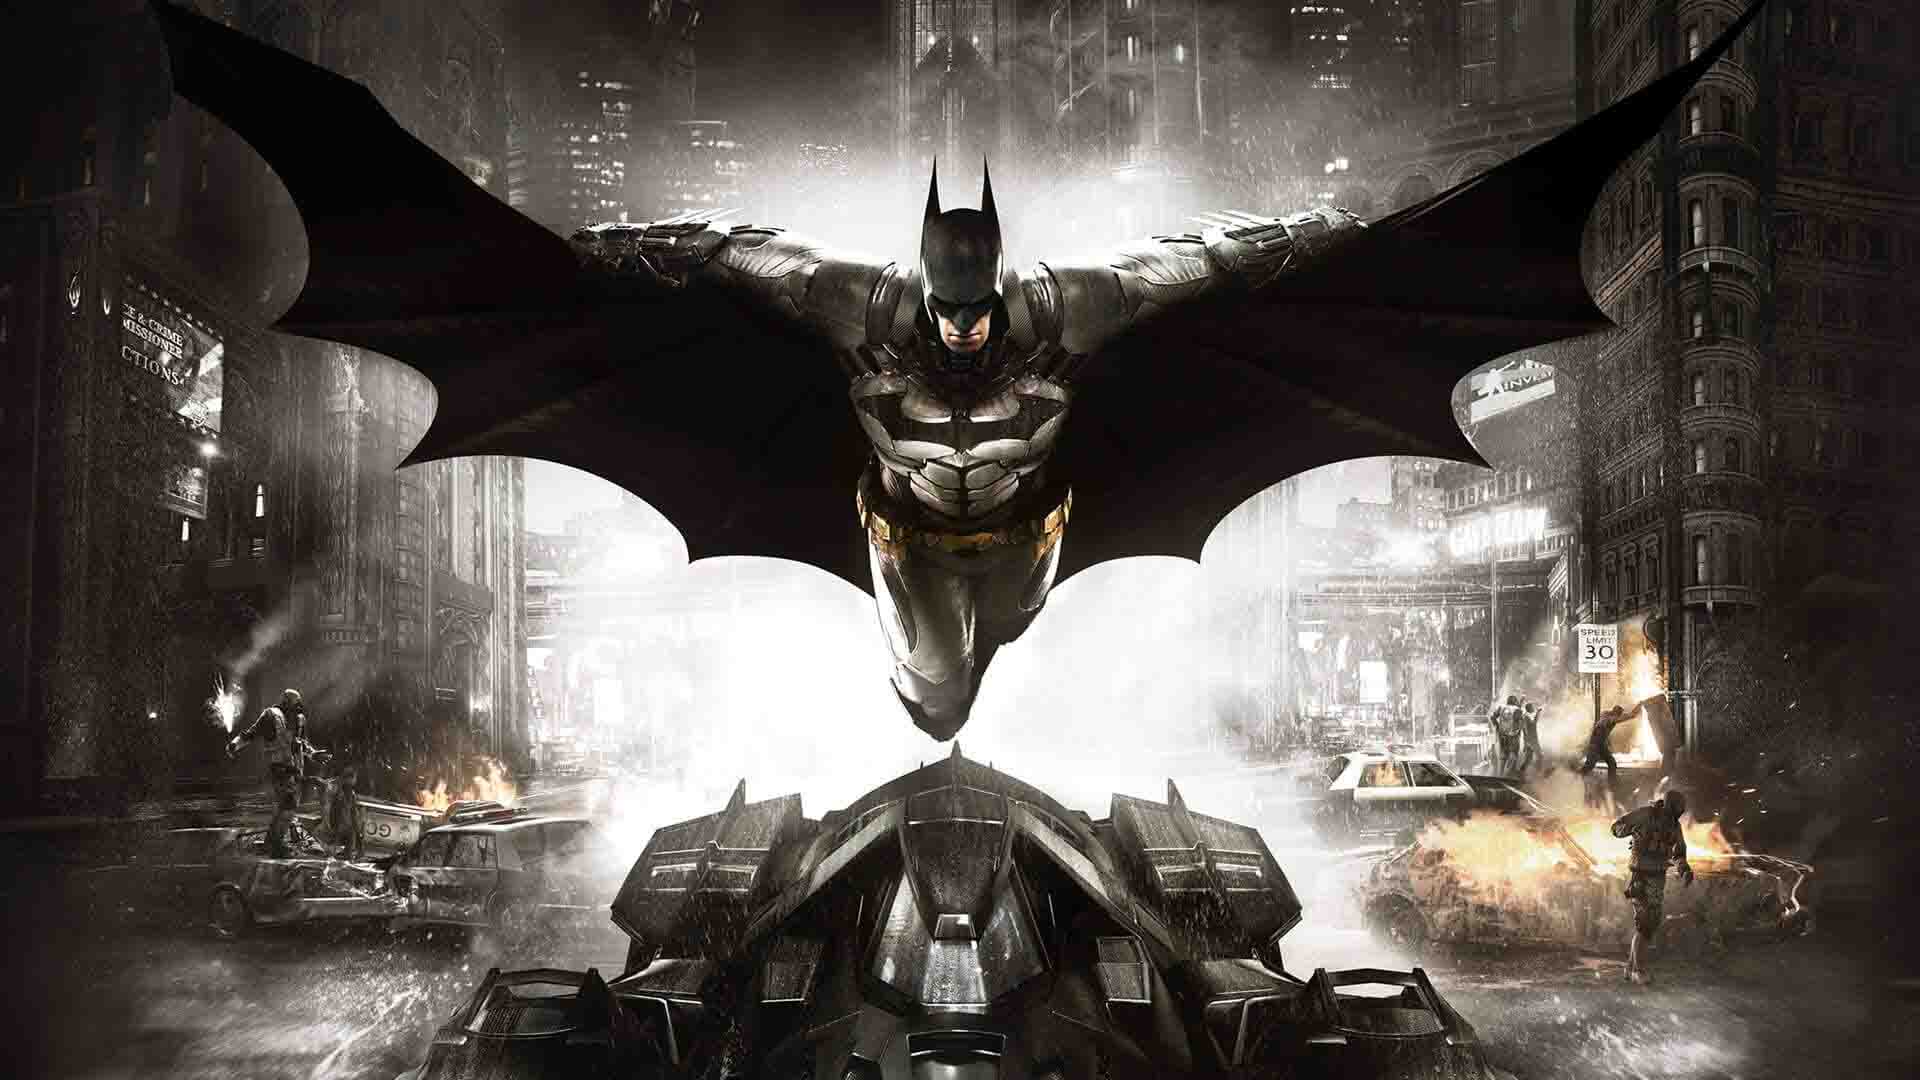 Batman™ Arkham Knight System Requirements for PC Games minimum, recommended specifications for Windows, CPU, OS, Processor, RAM Memory, Storage, and GPU.